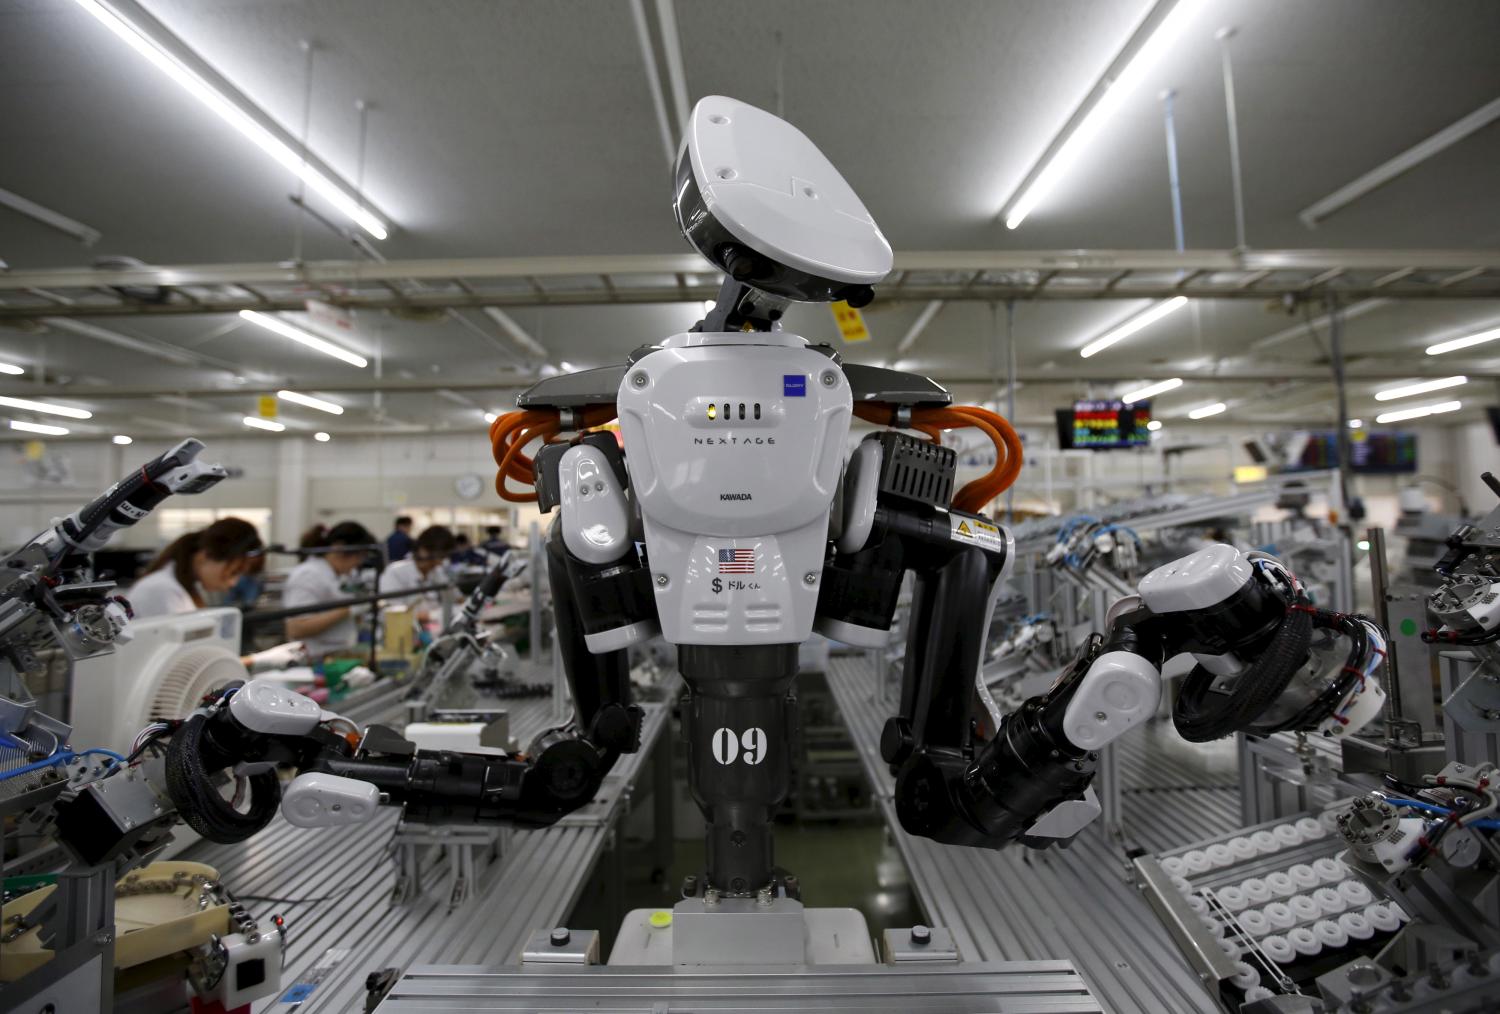 A humanoid robot works side by side with employees in the assembly line at a factory of Glory Ltd., a manufacturer of automatic change dispensers, in Kazo, north of Tokyo, Japan, July 1, 2015. Japanese firms are ramping up spending on robotics and automation, responding at last to premier Shinzo Abe's efforts to stimulate the economy and end two decades of stagnation and deflation. Picture taken July 1, 2015. REUTERS/Issei Kato TPX IMAGES OF THE DAY - GF10000147191